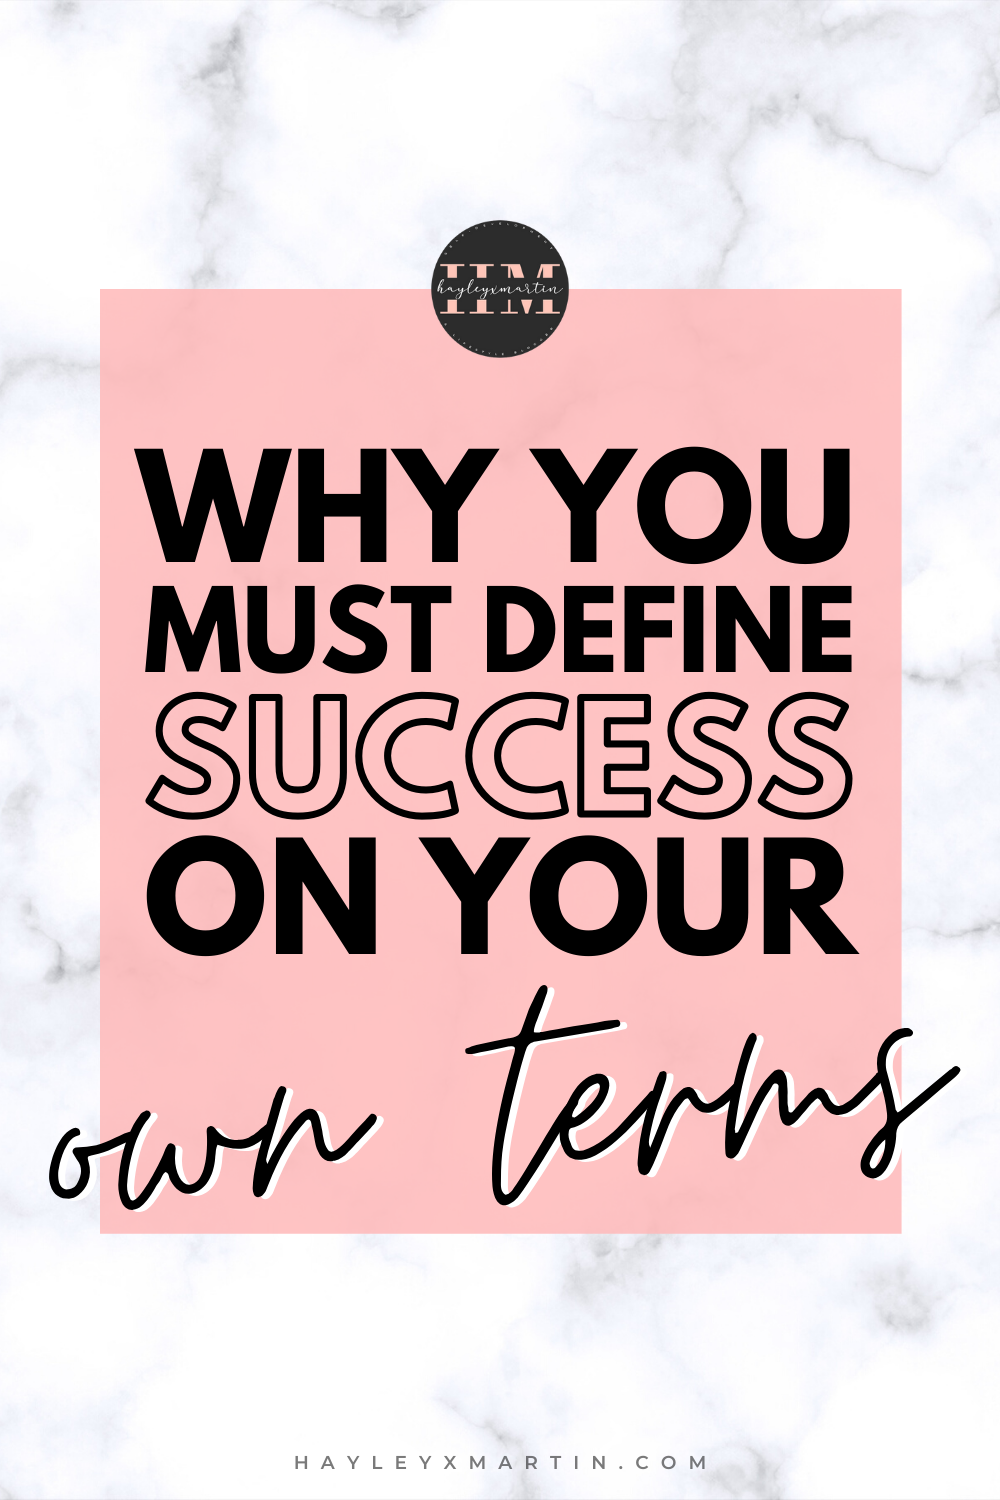 WHY YOU MUST DEFINE SUCCESS ON YOUR OWN TERMS | HAYLEYXMARTIN